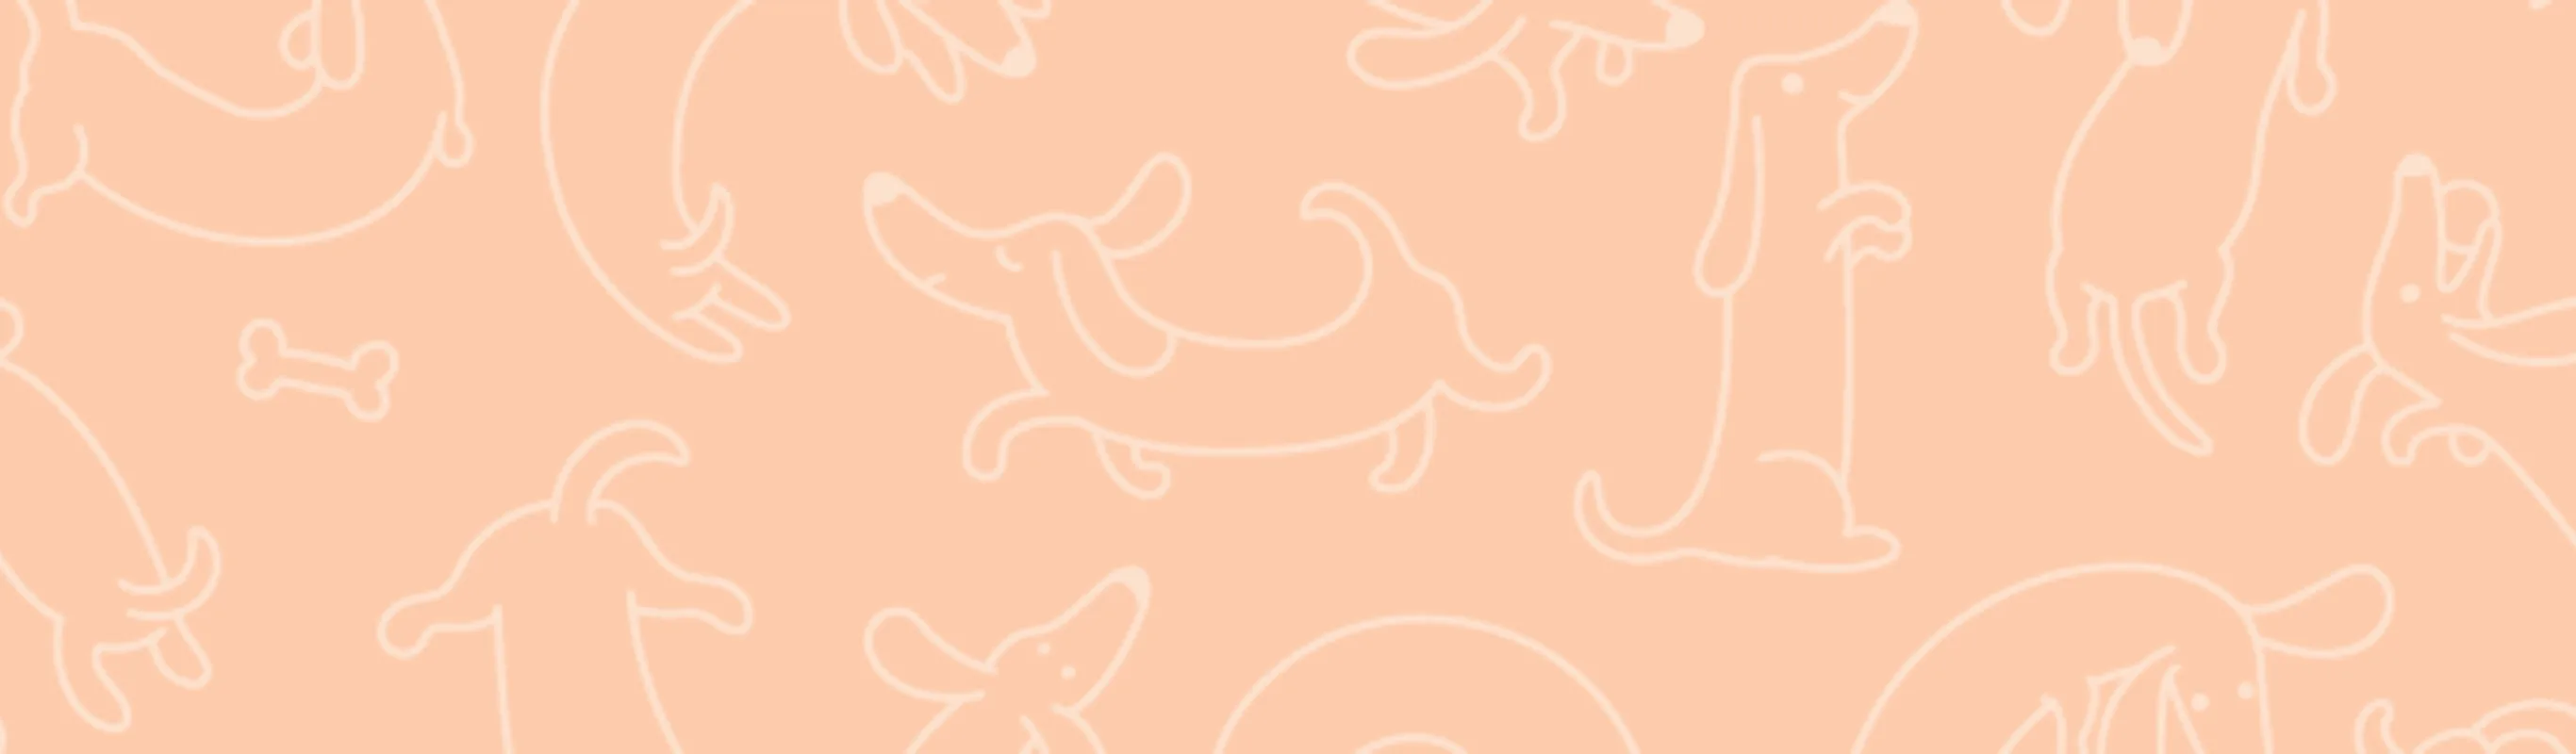 Dogs patterns over an orange background